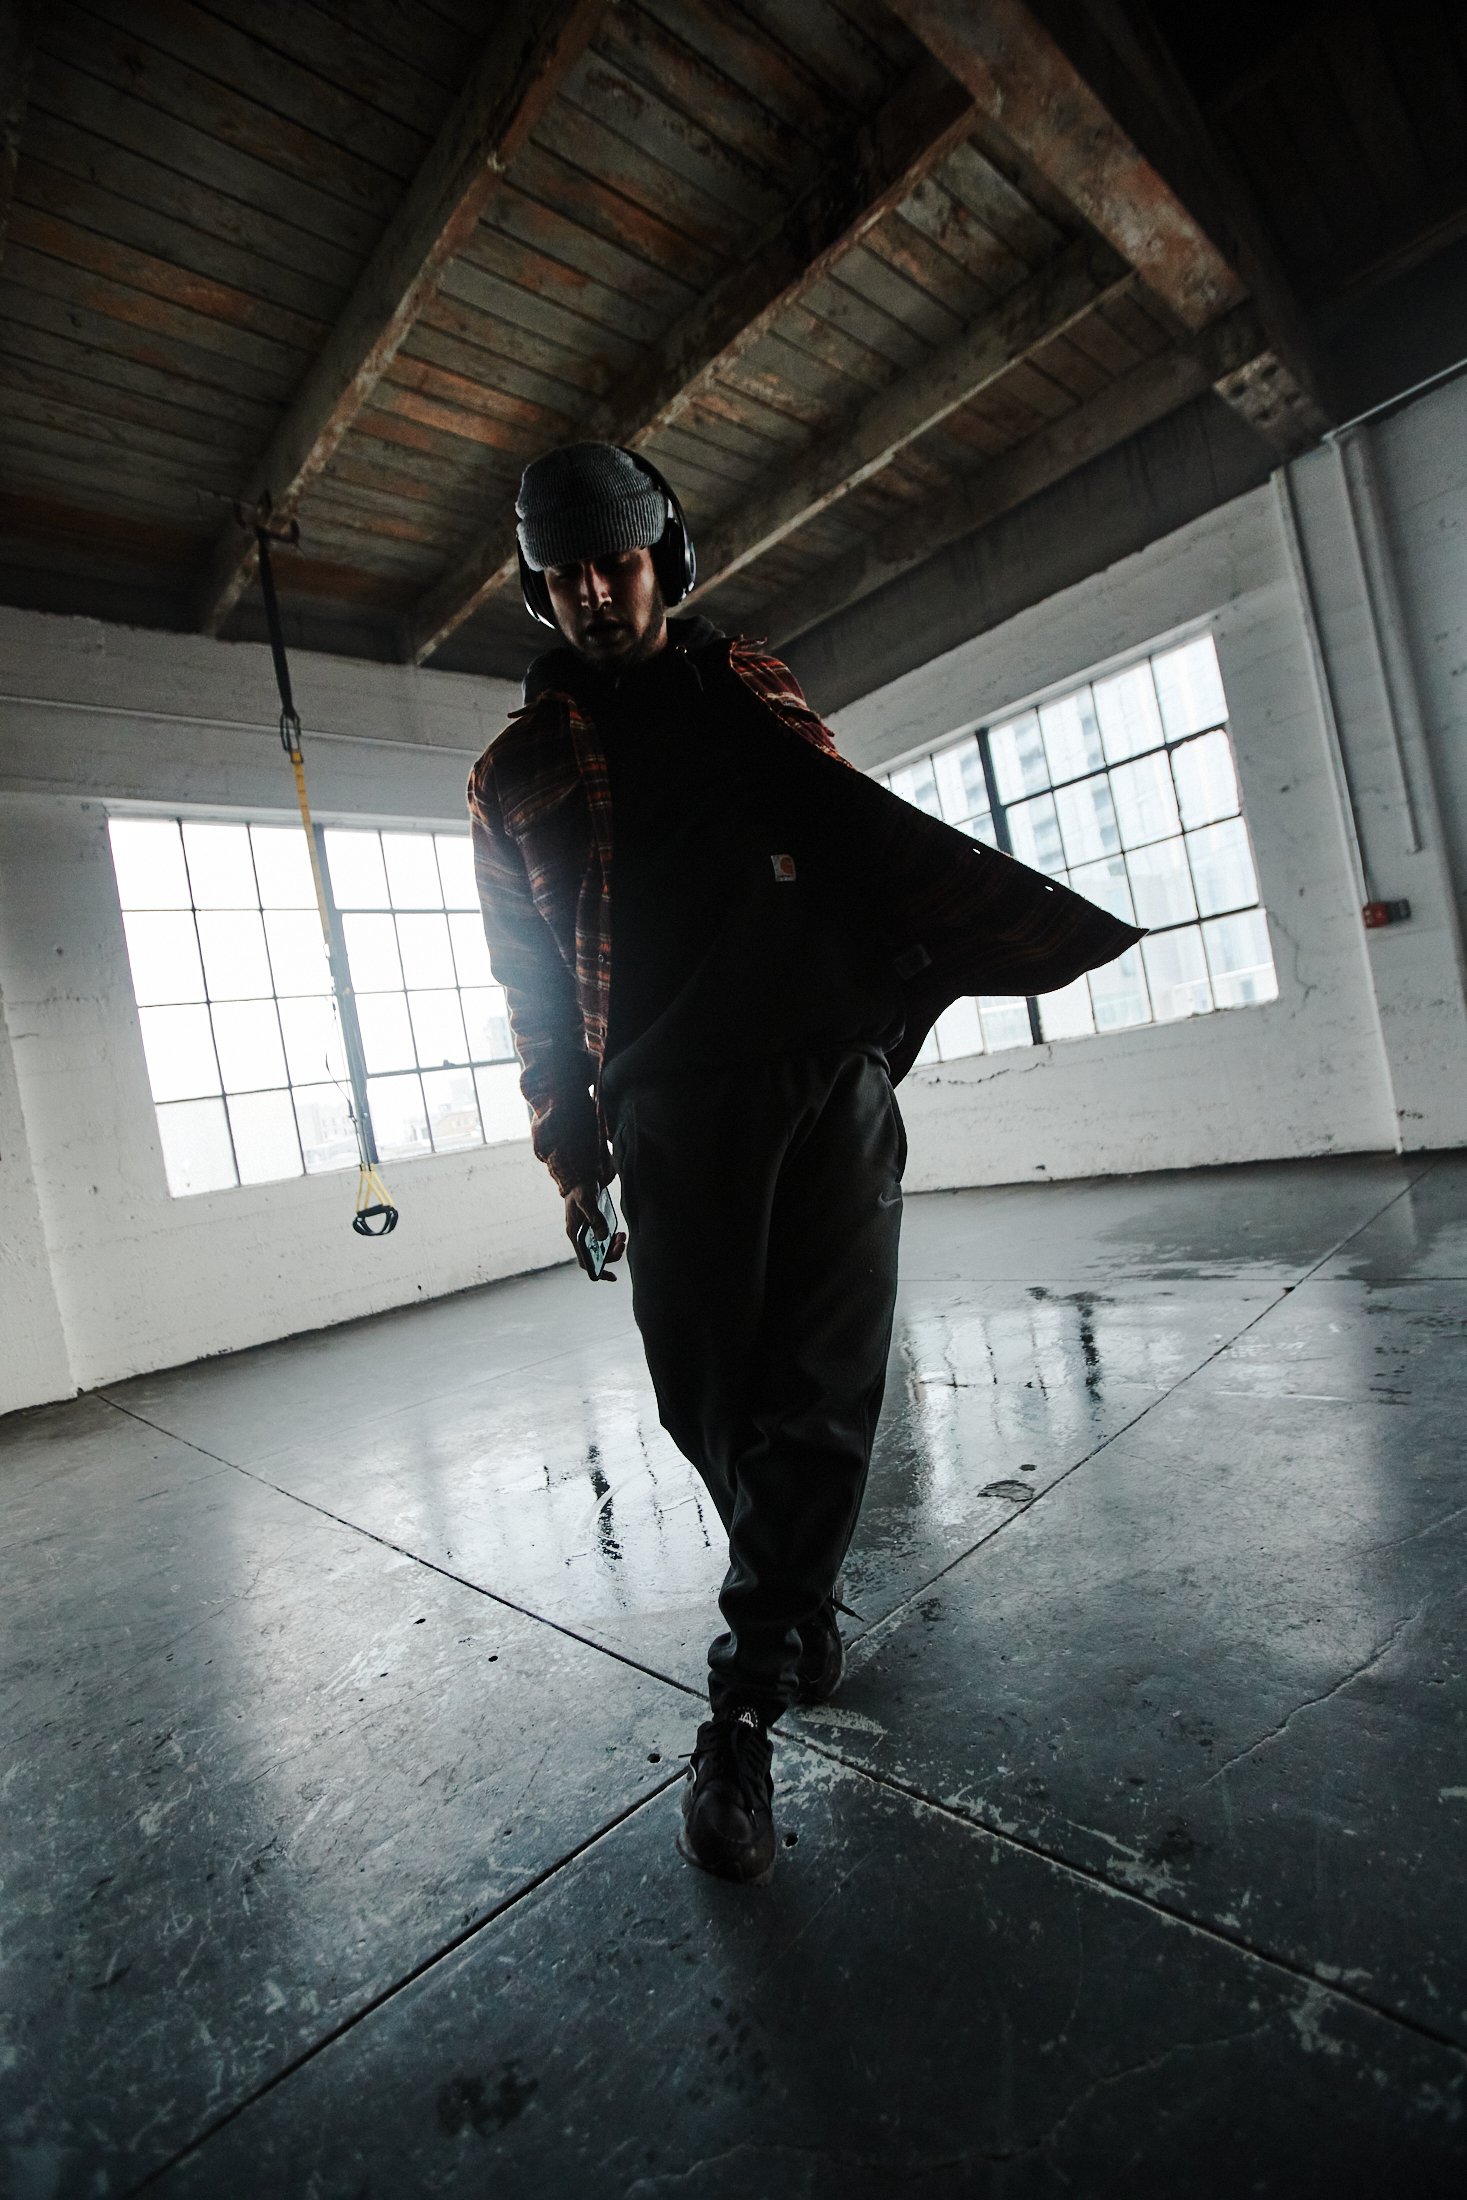 TJ Yale, wearing a beanie, flannel shirt, pants, and sneakers, performs a dance move in an industrial space with windows behind him.